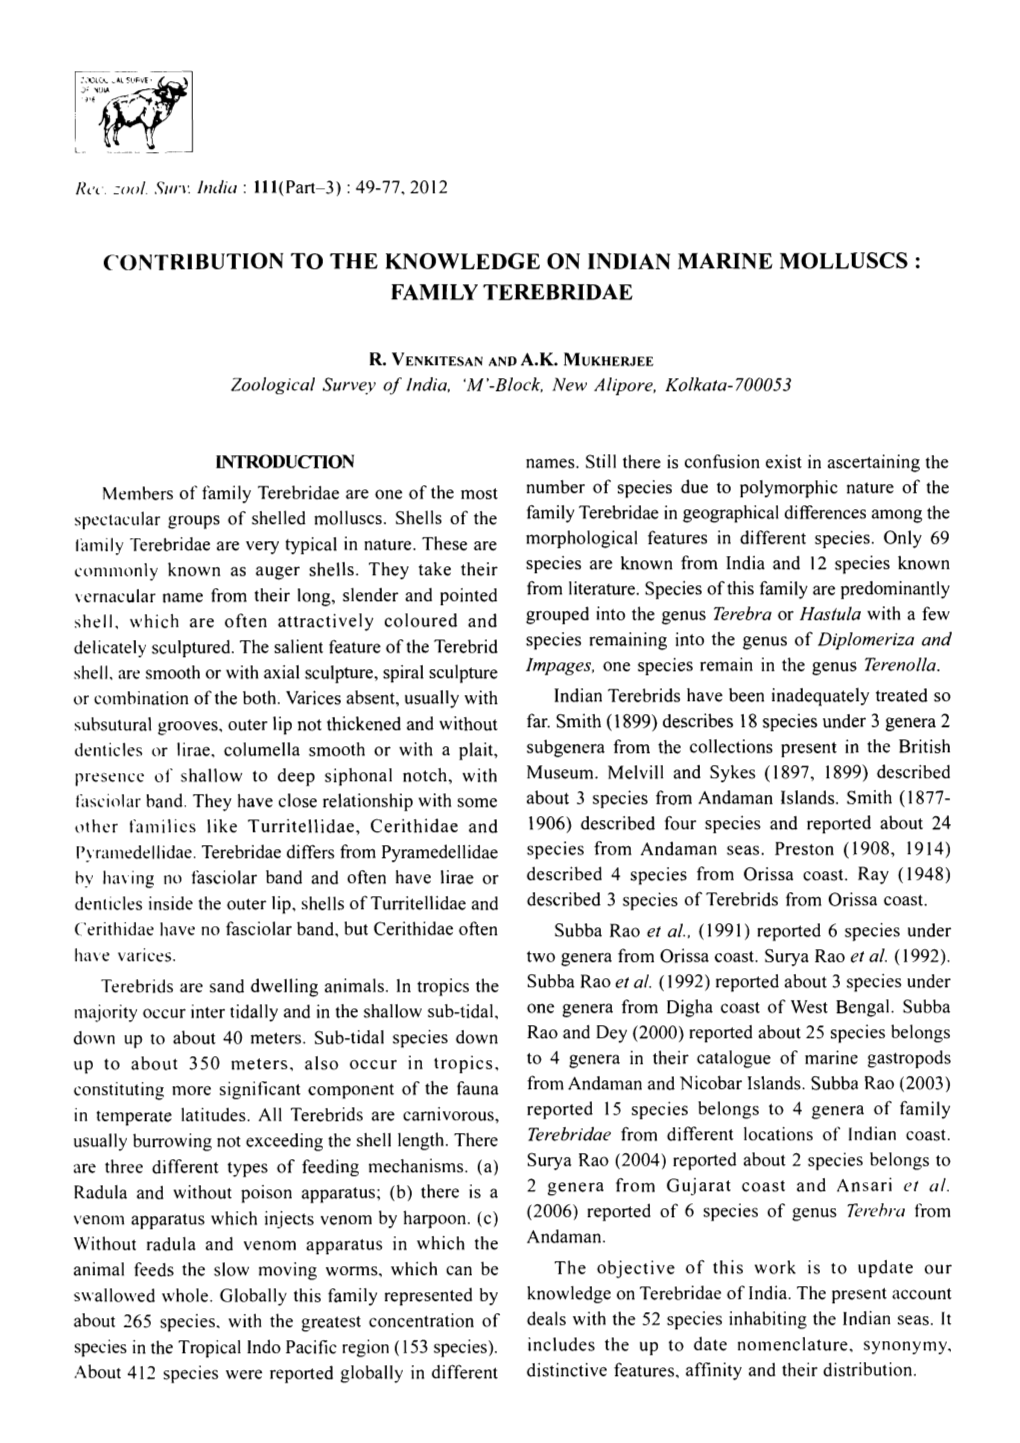 Contribution to the Knowledge on Indian Marine Molluscs: Family Terebridae